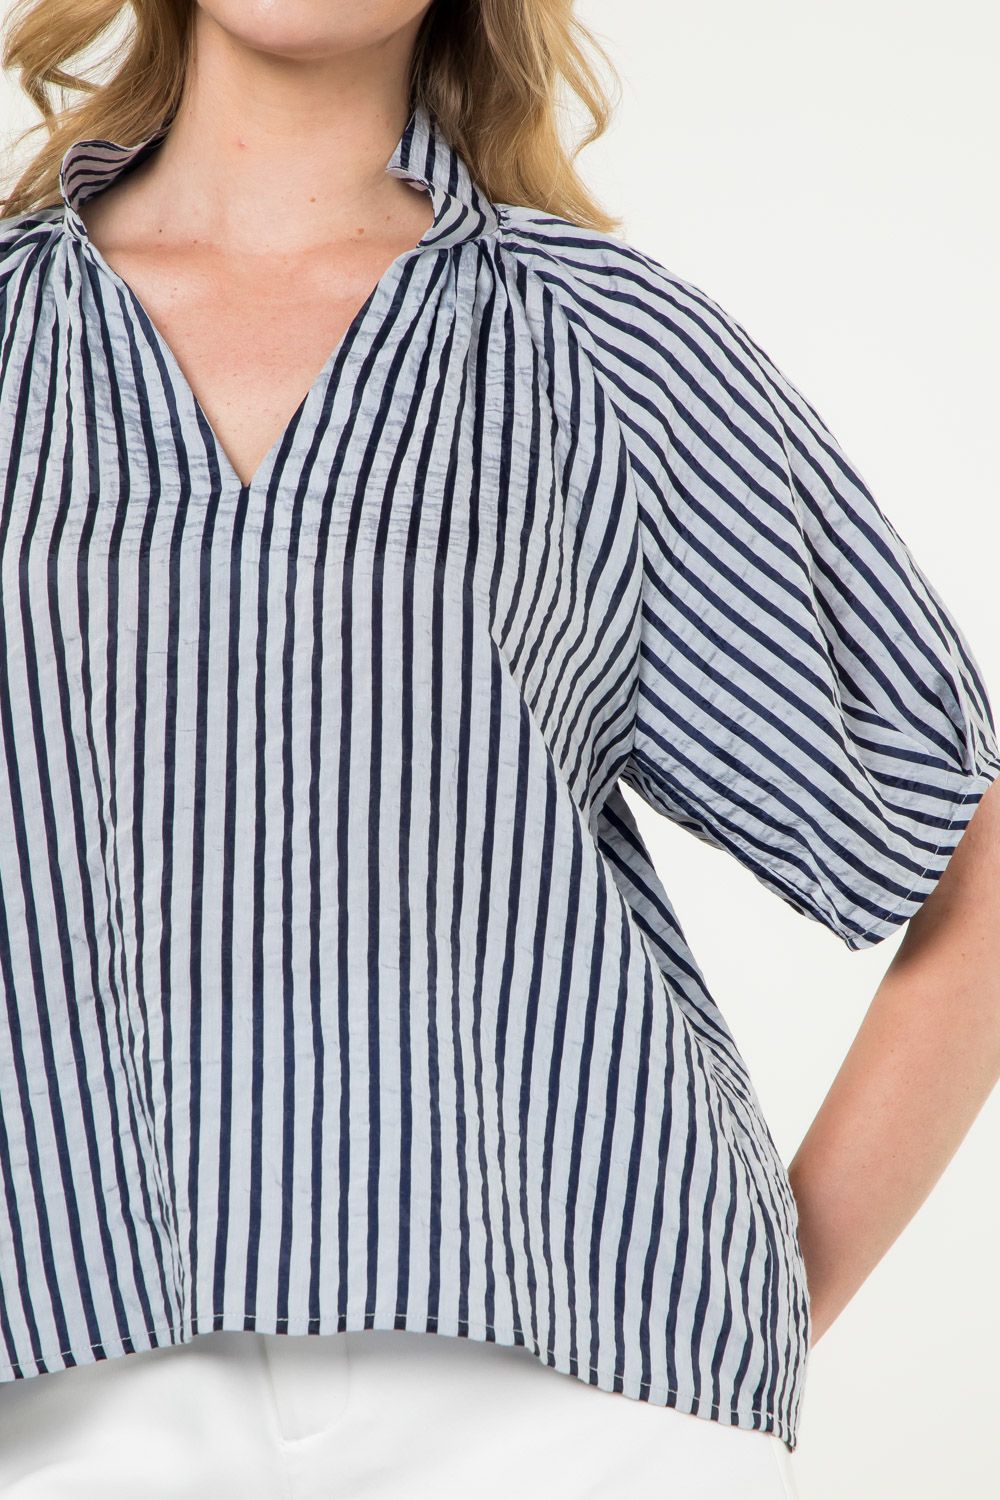 April Puff Sleeve Striped Top